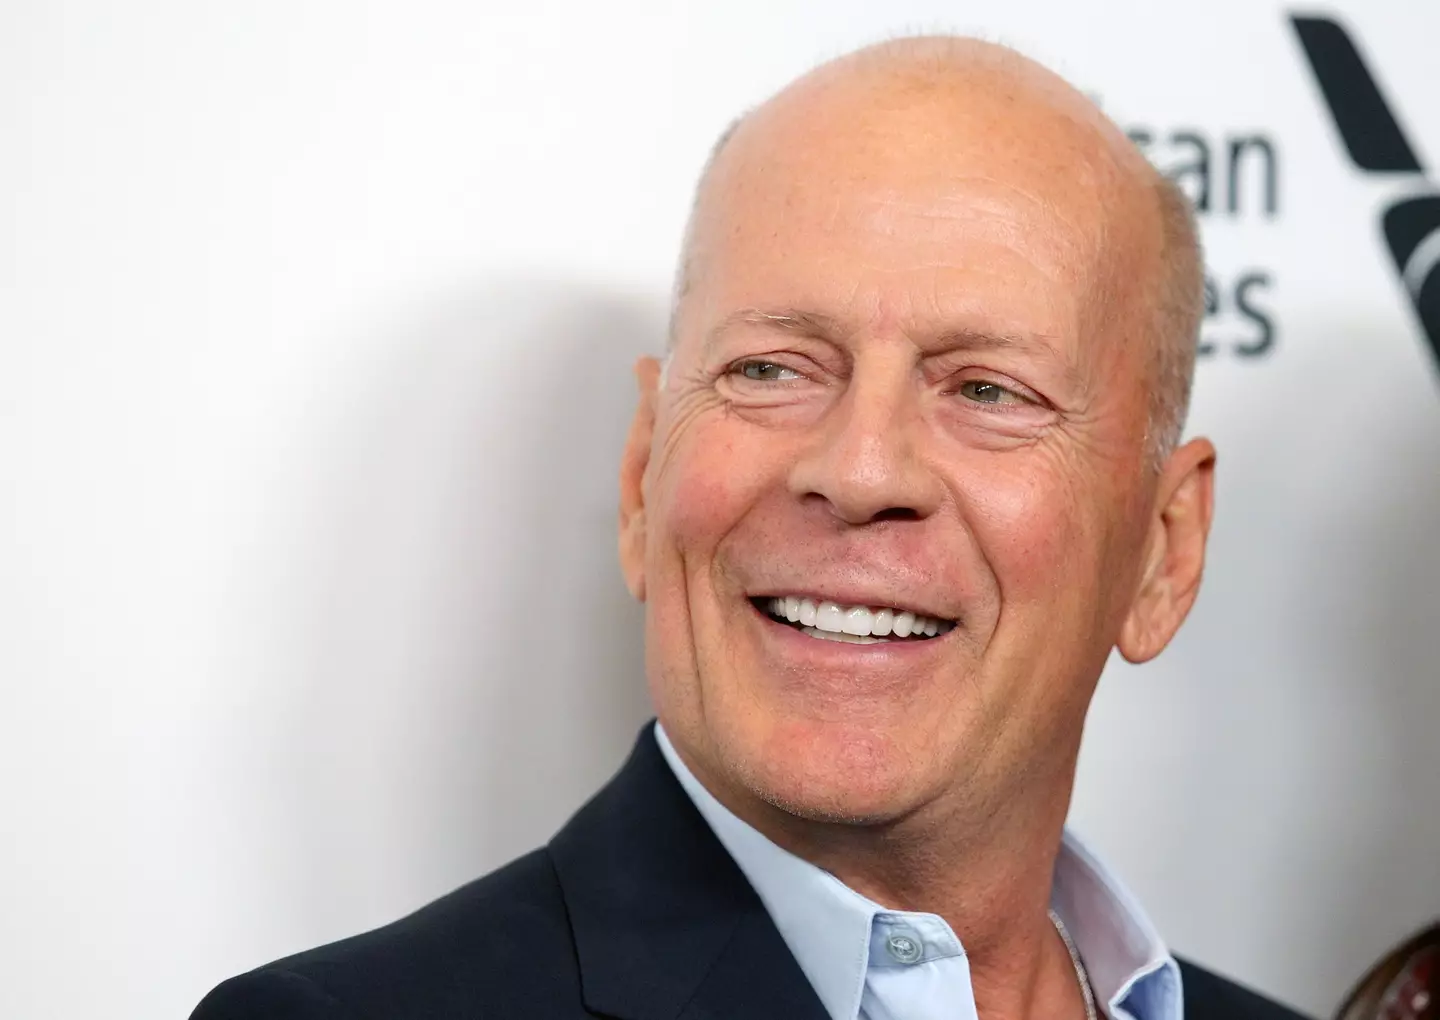 Bruce Willis was diagnosed with dementia in February.